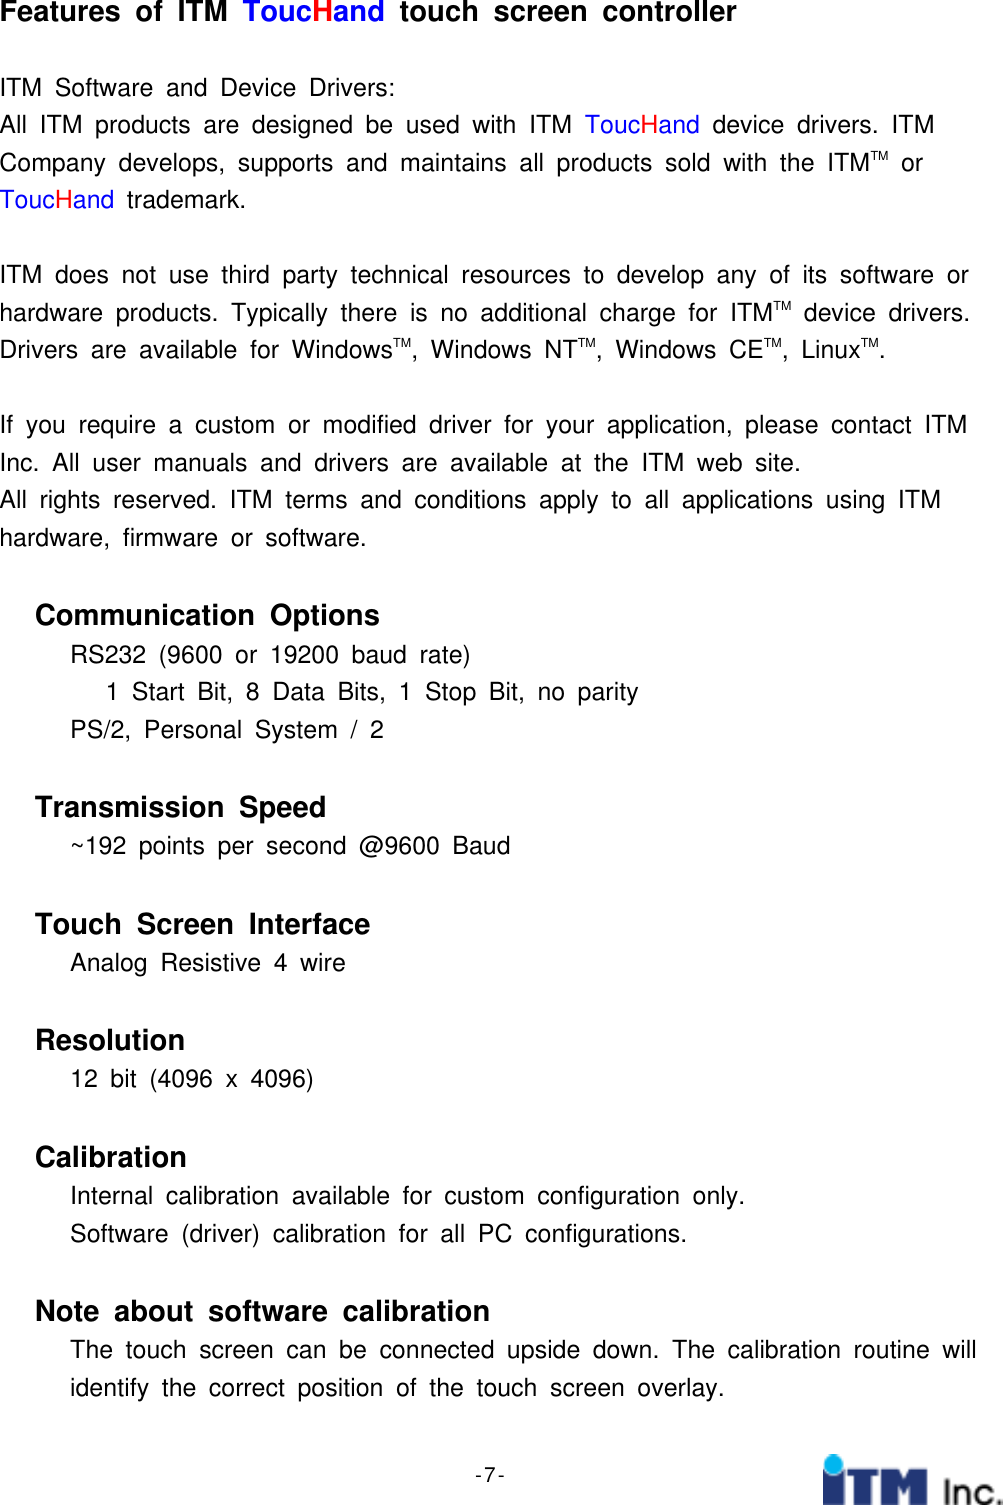 - 7 -Features of ITM ToucHand touch screen controllerITM Software and Device Drivers:All ITM products are designed be used with ITM ToucHand device drivers. ITMCompany develops, supports and maintains all products sold with the ITMTM orToucHand trademark.ITM does not use third party technical resources to develop any of its software orhardware products. Typically there is no additional charge for ITMTM device drivers.Drivers are available for WindowsTM, Windows NTTM, Windows CETM,LinuxTM.If you require a custom or modified driver for your application, please contact ITMInc. All user manuals and drivers are available at the ITM web site.All rights reserved. ITM terms and conditions apply to all applications using ITMhardware, firmware or software.Communication OptionsRS232 (9600 or 19200 baud rate)1StartBit,8DataBits,1StopBit,noparityPS/2, Personal System / 2Transmission Speed~192 points per second @9600 BaudTouch Screen InterfaceAnalog Resistive 4 wireResolution12 bit (4096 x 4096)CalibrationInternal calibration available for custom configuration only.Software (driver) calibration for all PC configurations.Note about software calibrationThe touch screen can be connected upside down. The calibration routine willidentify the correct position of the touch screen overlay.